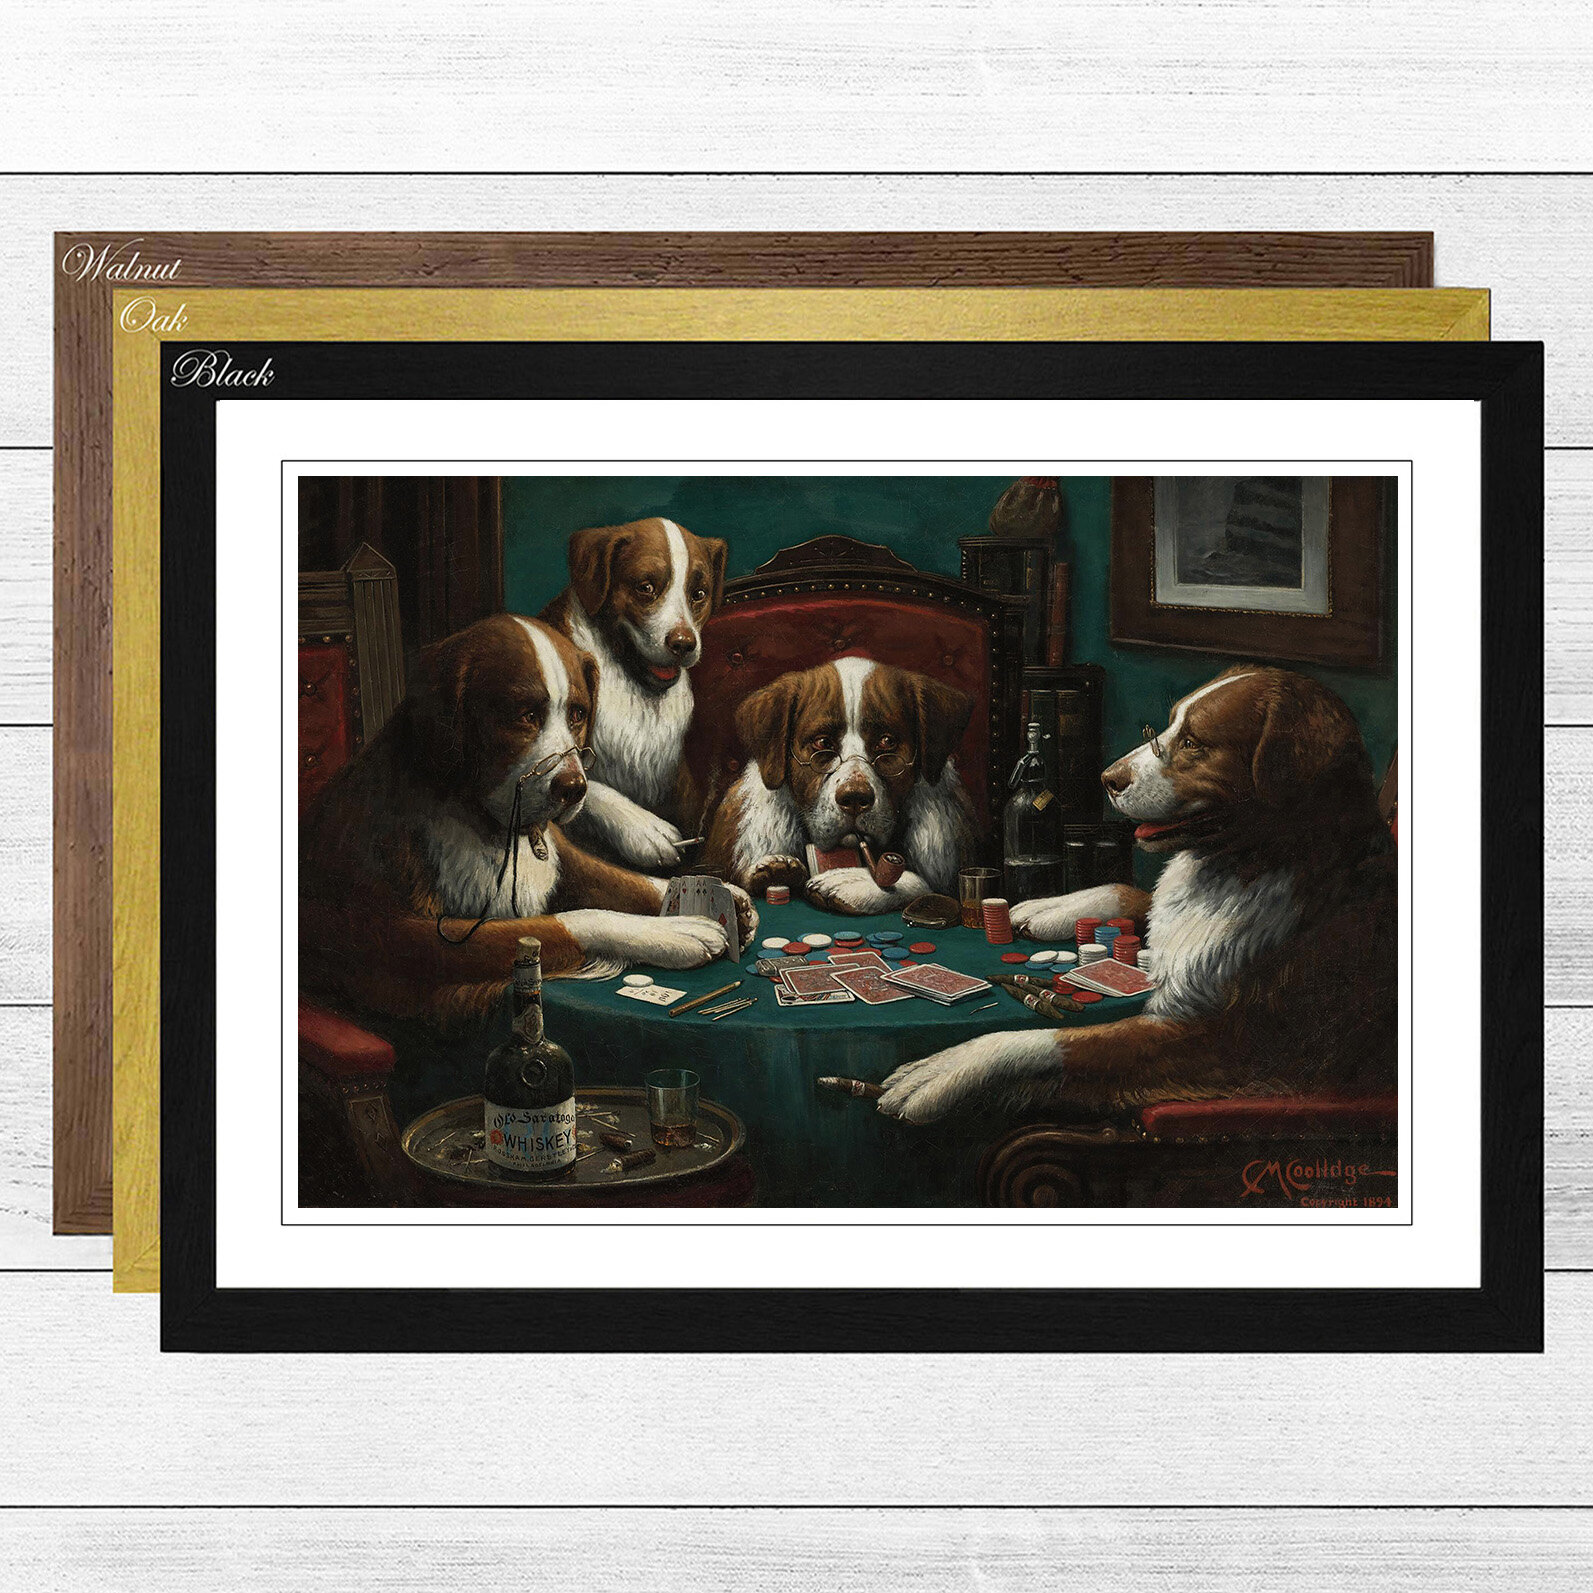 coolidge dogs playing poker